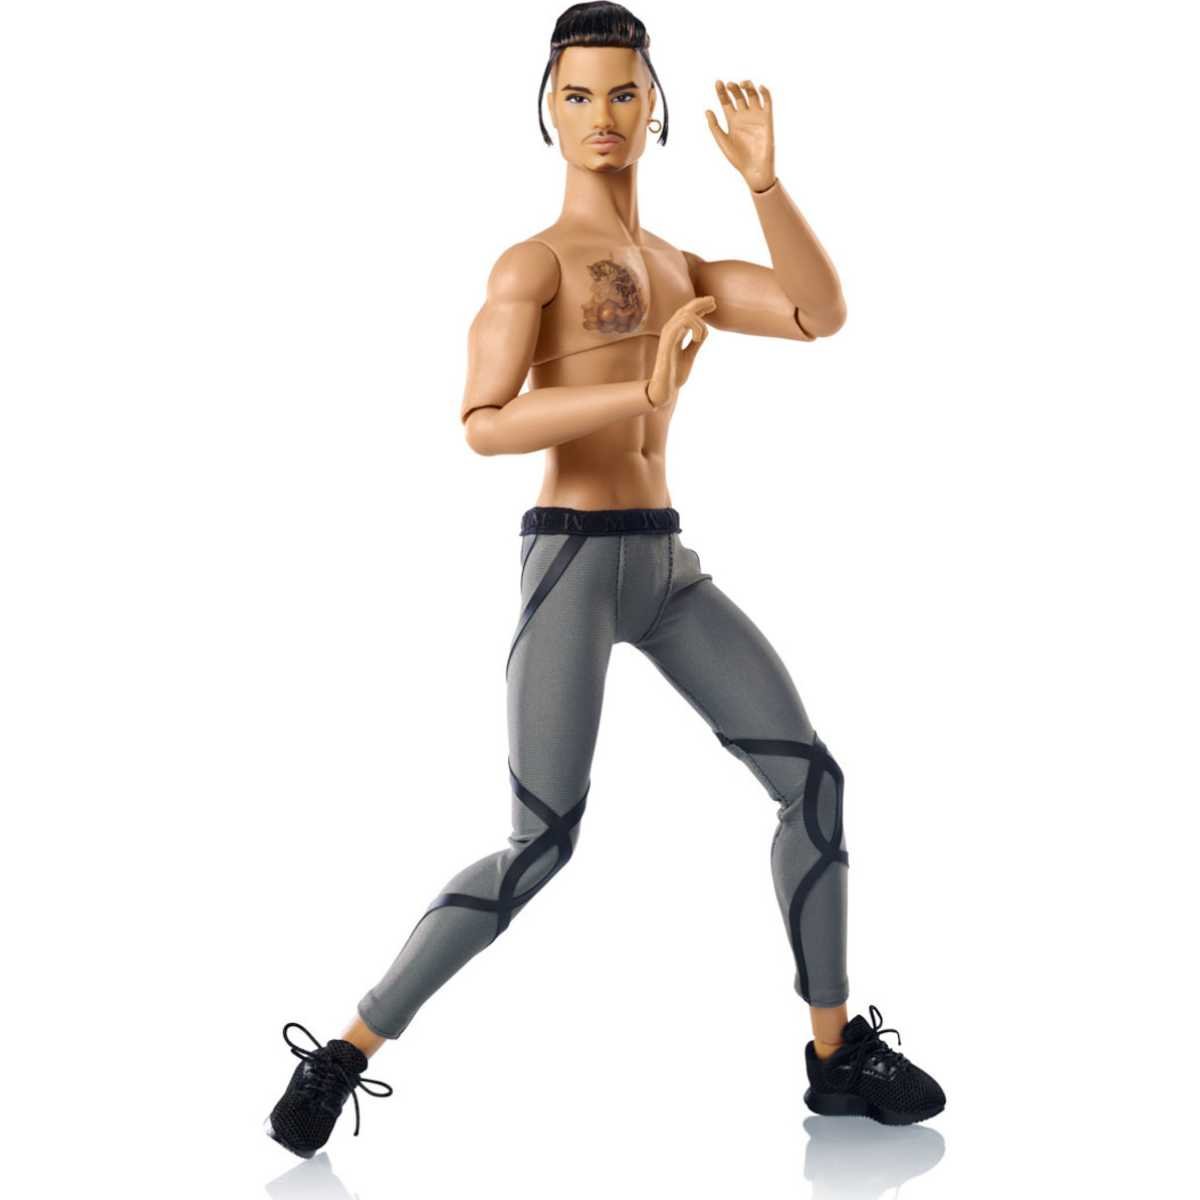 Integrity Toys Power Workout Tenzin Dahkling Basic Doll The Monarchs HOMME Collection - Simon's Collectibles